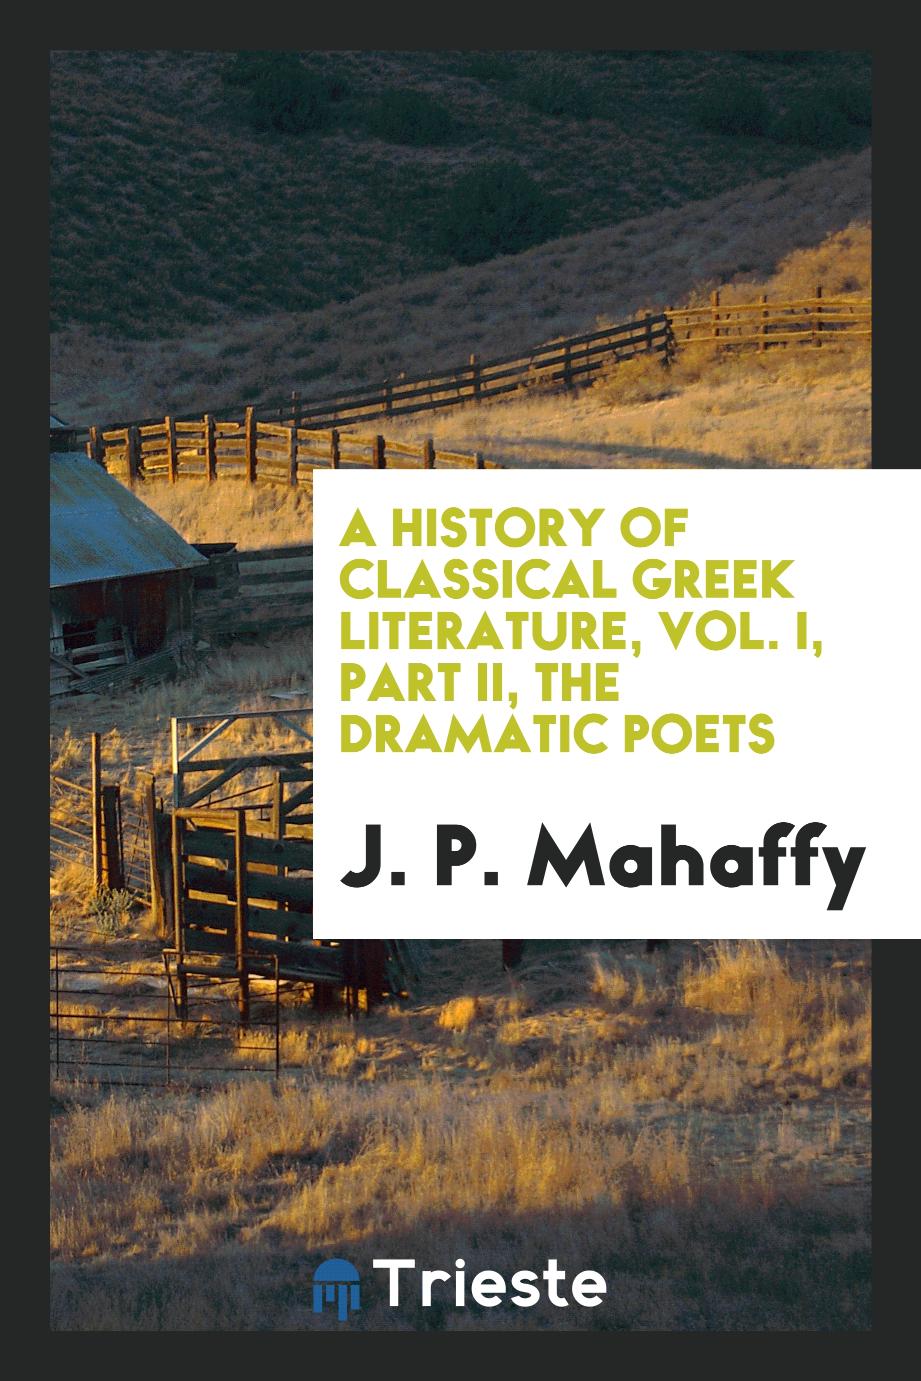 A history of classical Greek literature, Vol. I, Part II, The dramatic poets